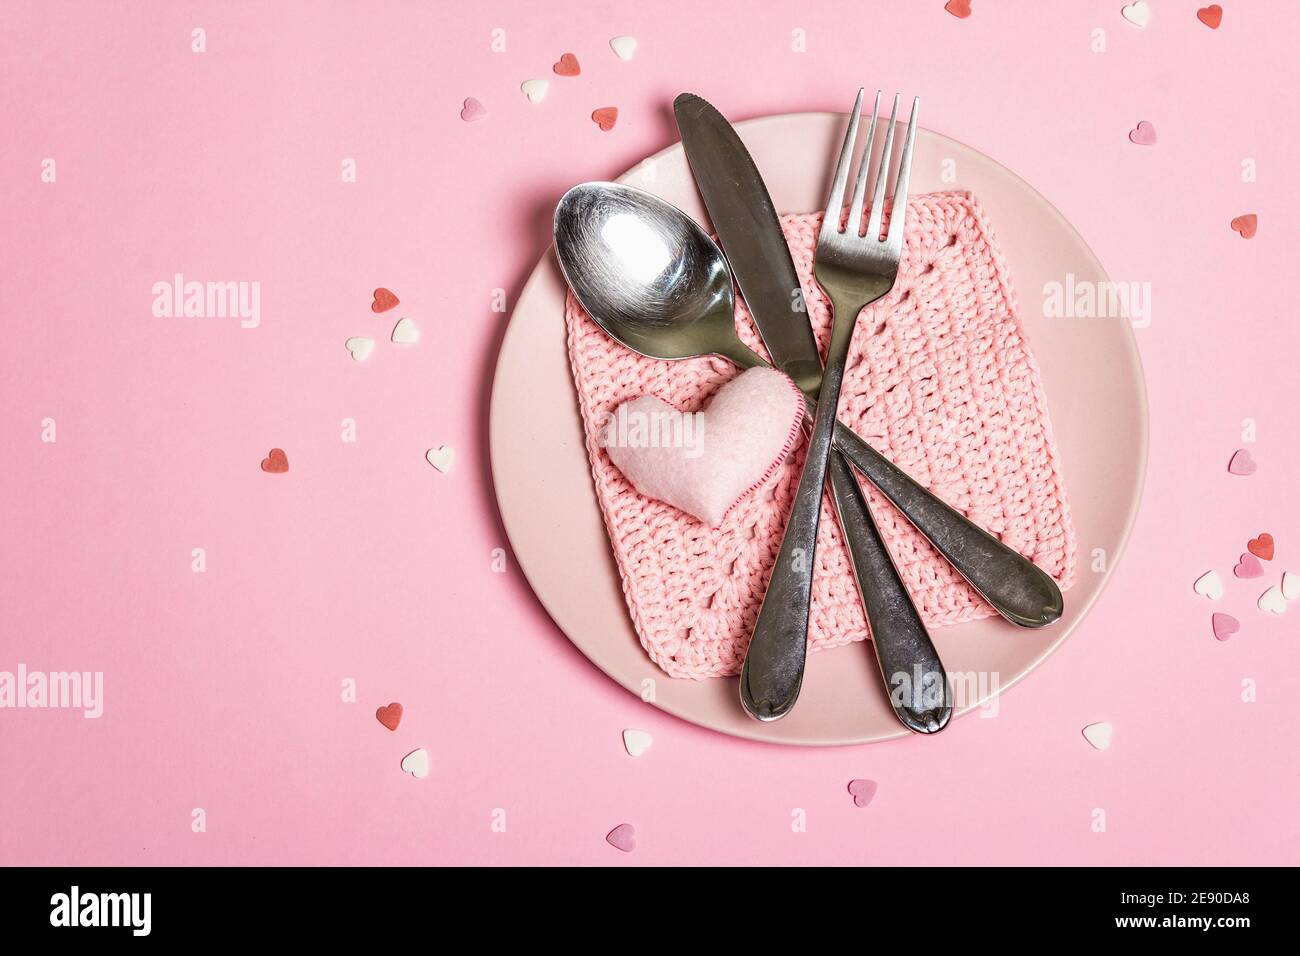 Romantic dinner table. Love concept for Valentine's or mother's day, wedding cutlery. Minimalistic style, rose plates, crochet napkin, scattered pastr Stock Photo